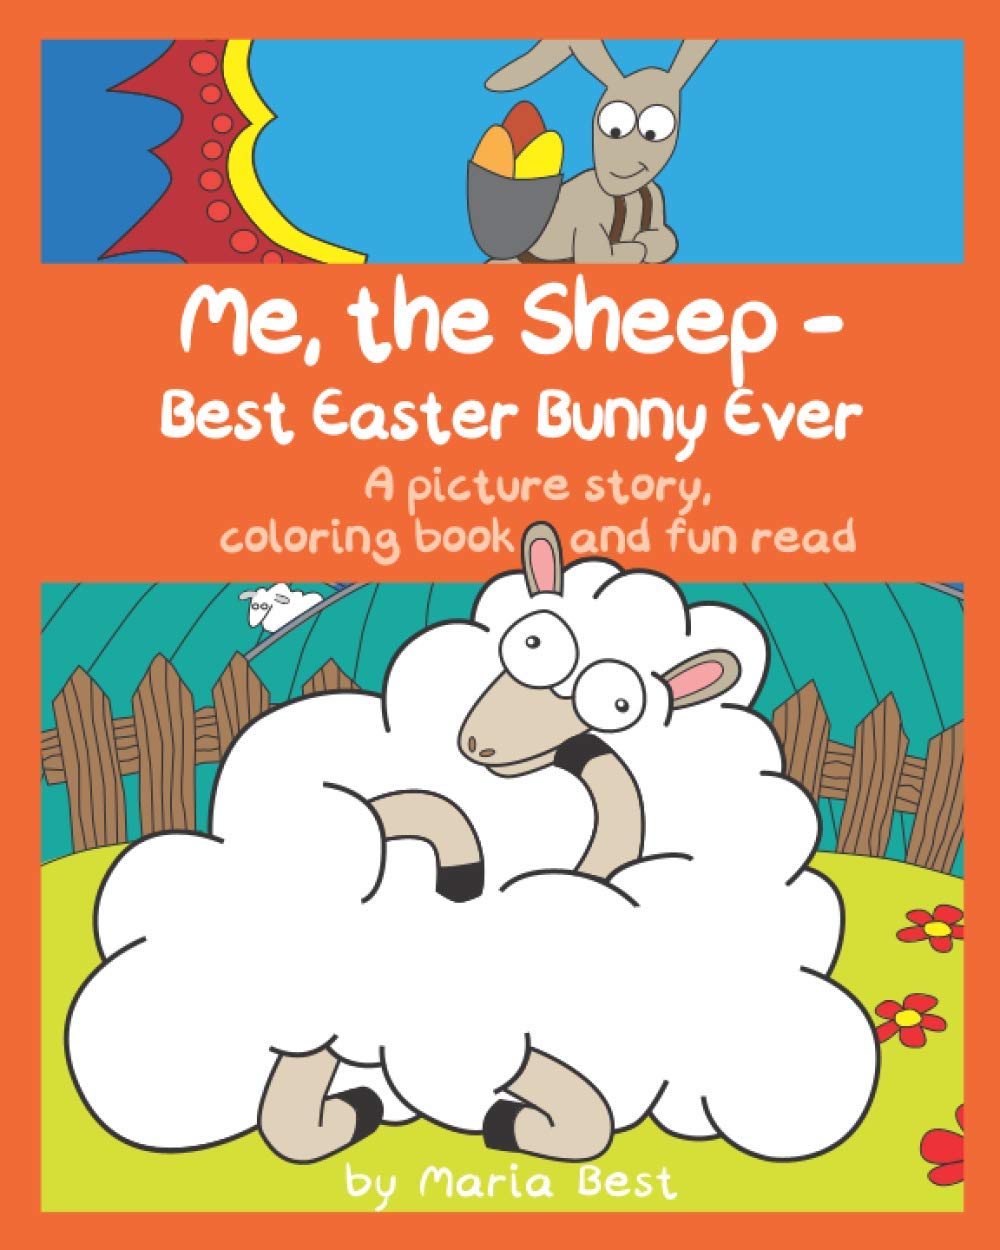 Art Creativity Book: "Me, the Sheep - Best Easter Bunny Ever!"